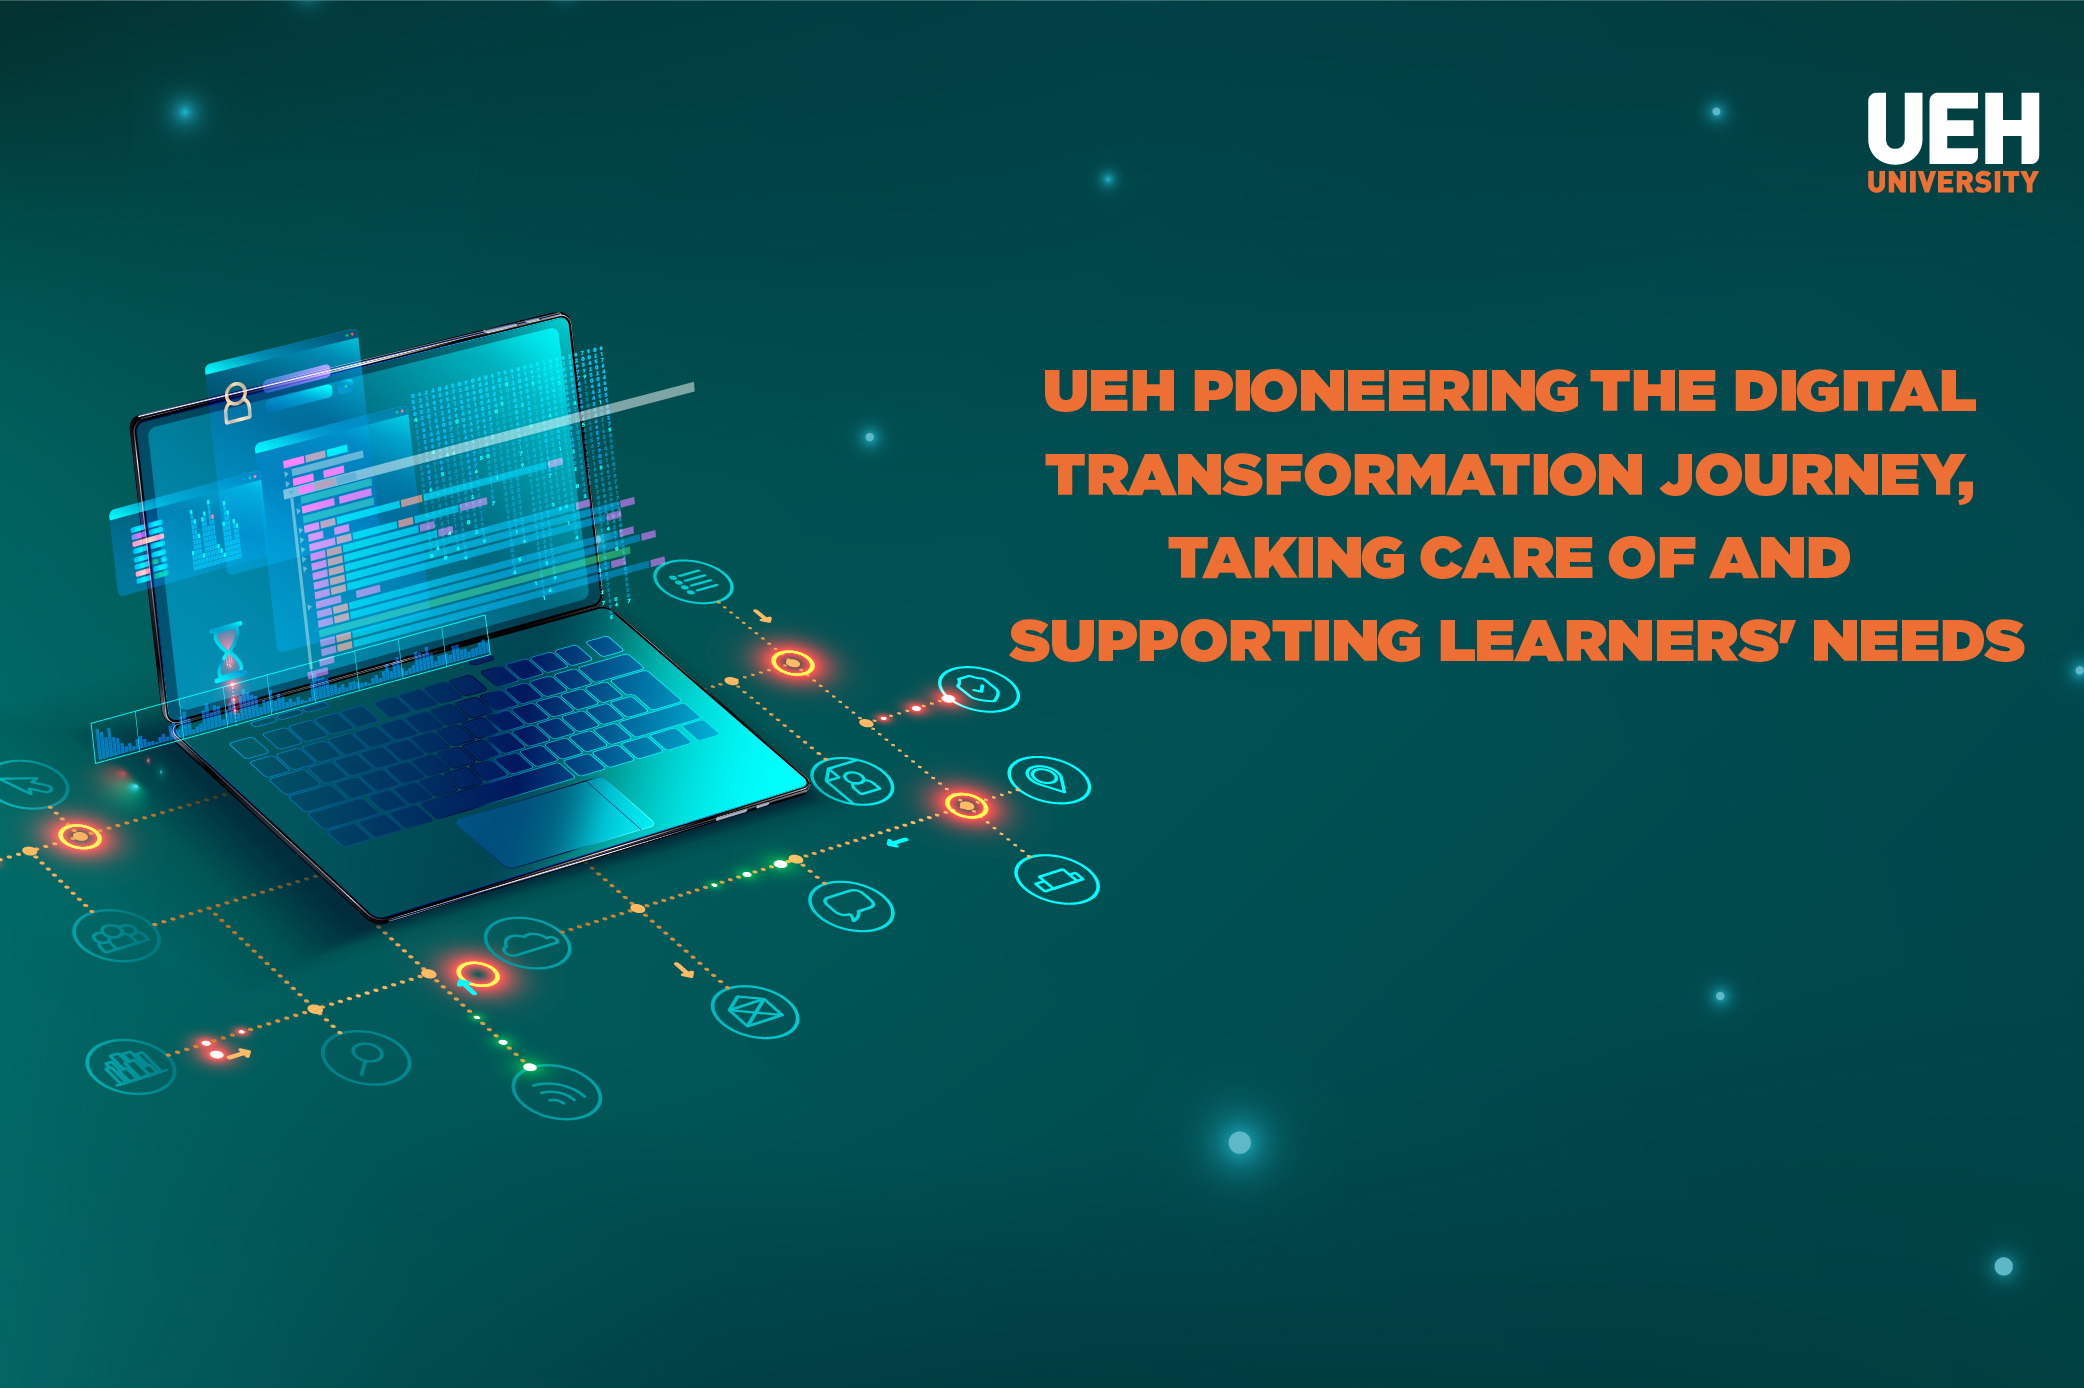 UEH pioneering the digital transformation journey, taking care of and supporting learners' needs